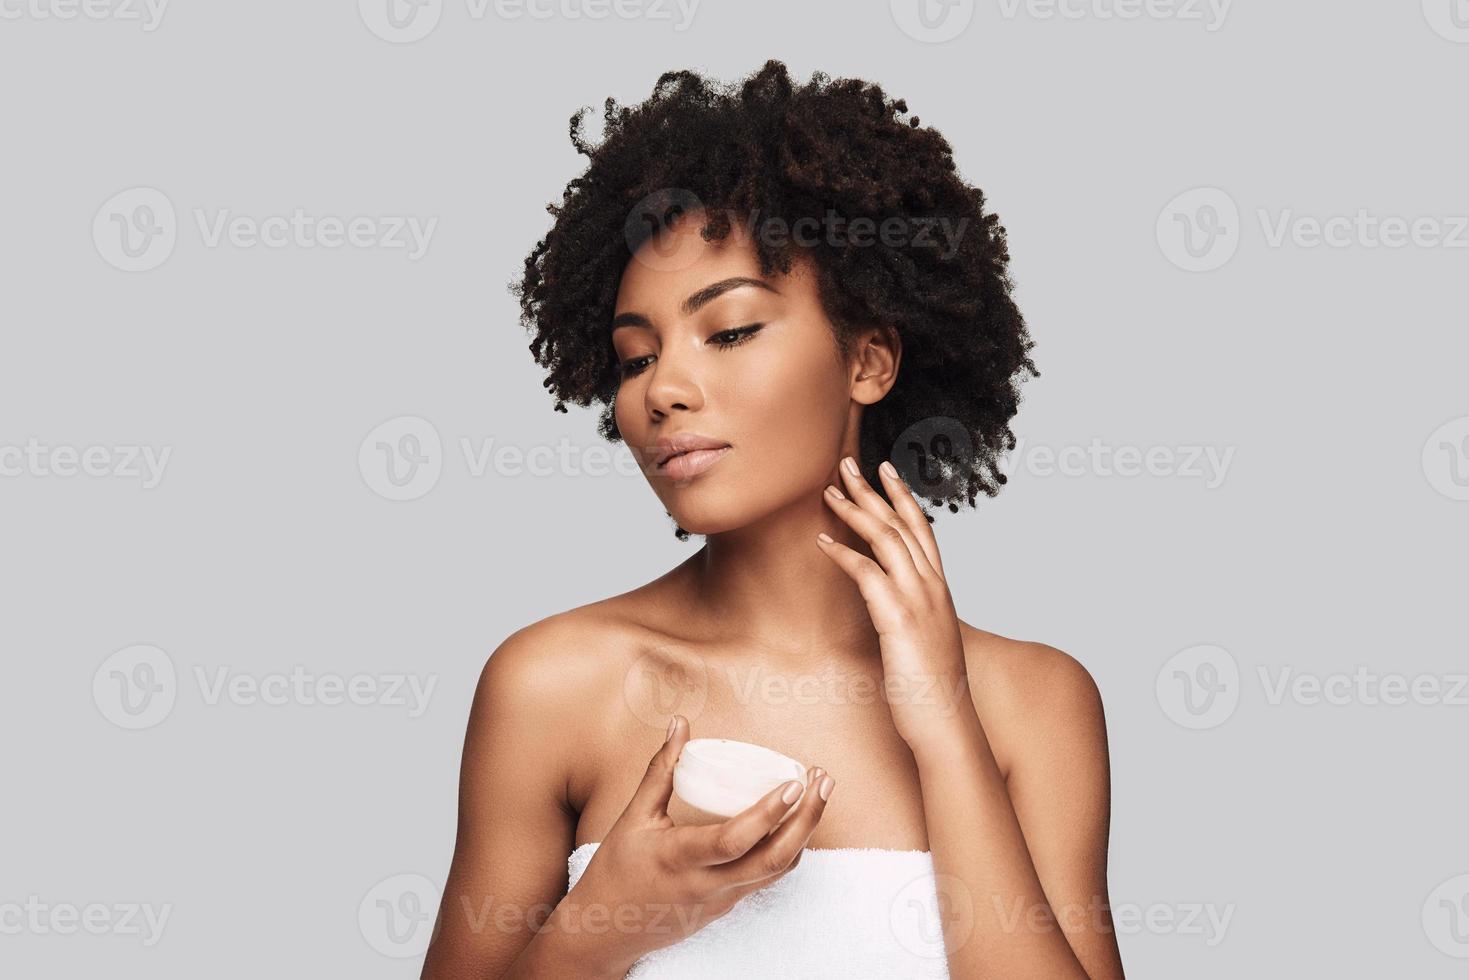 Clean and fresh. Attractive young African woman applying moisturizer and smiling while standing against grey background photo